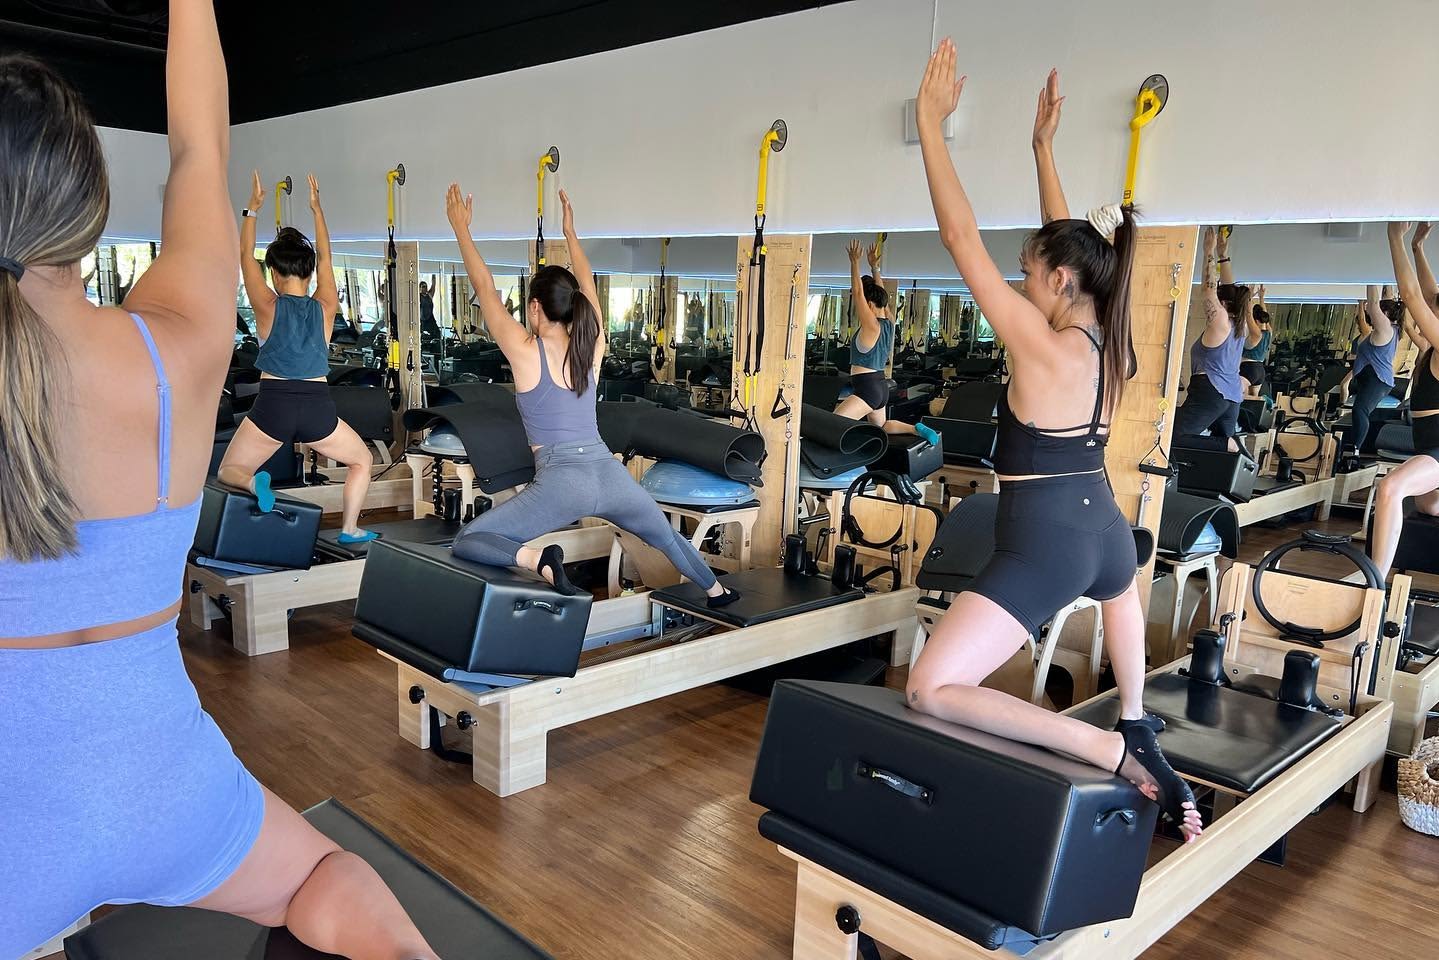 Club Pilates - West Covina: Read Reviews and Book Classes on ClassPass